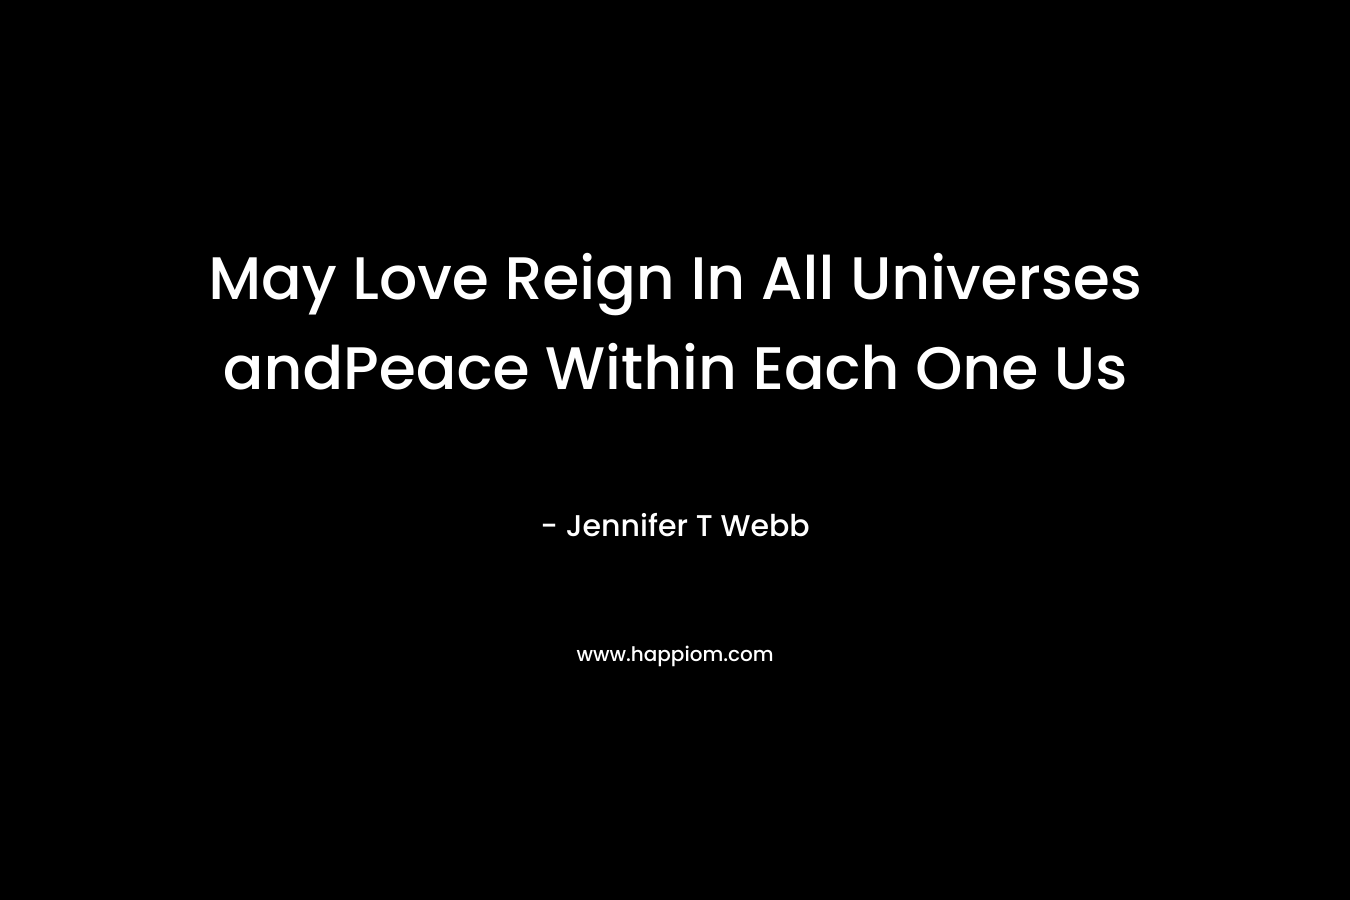 May Love Reign In All Universes andPeace Within Each One Us